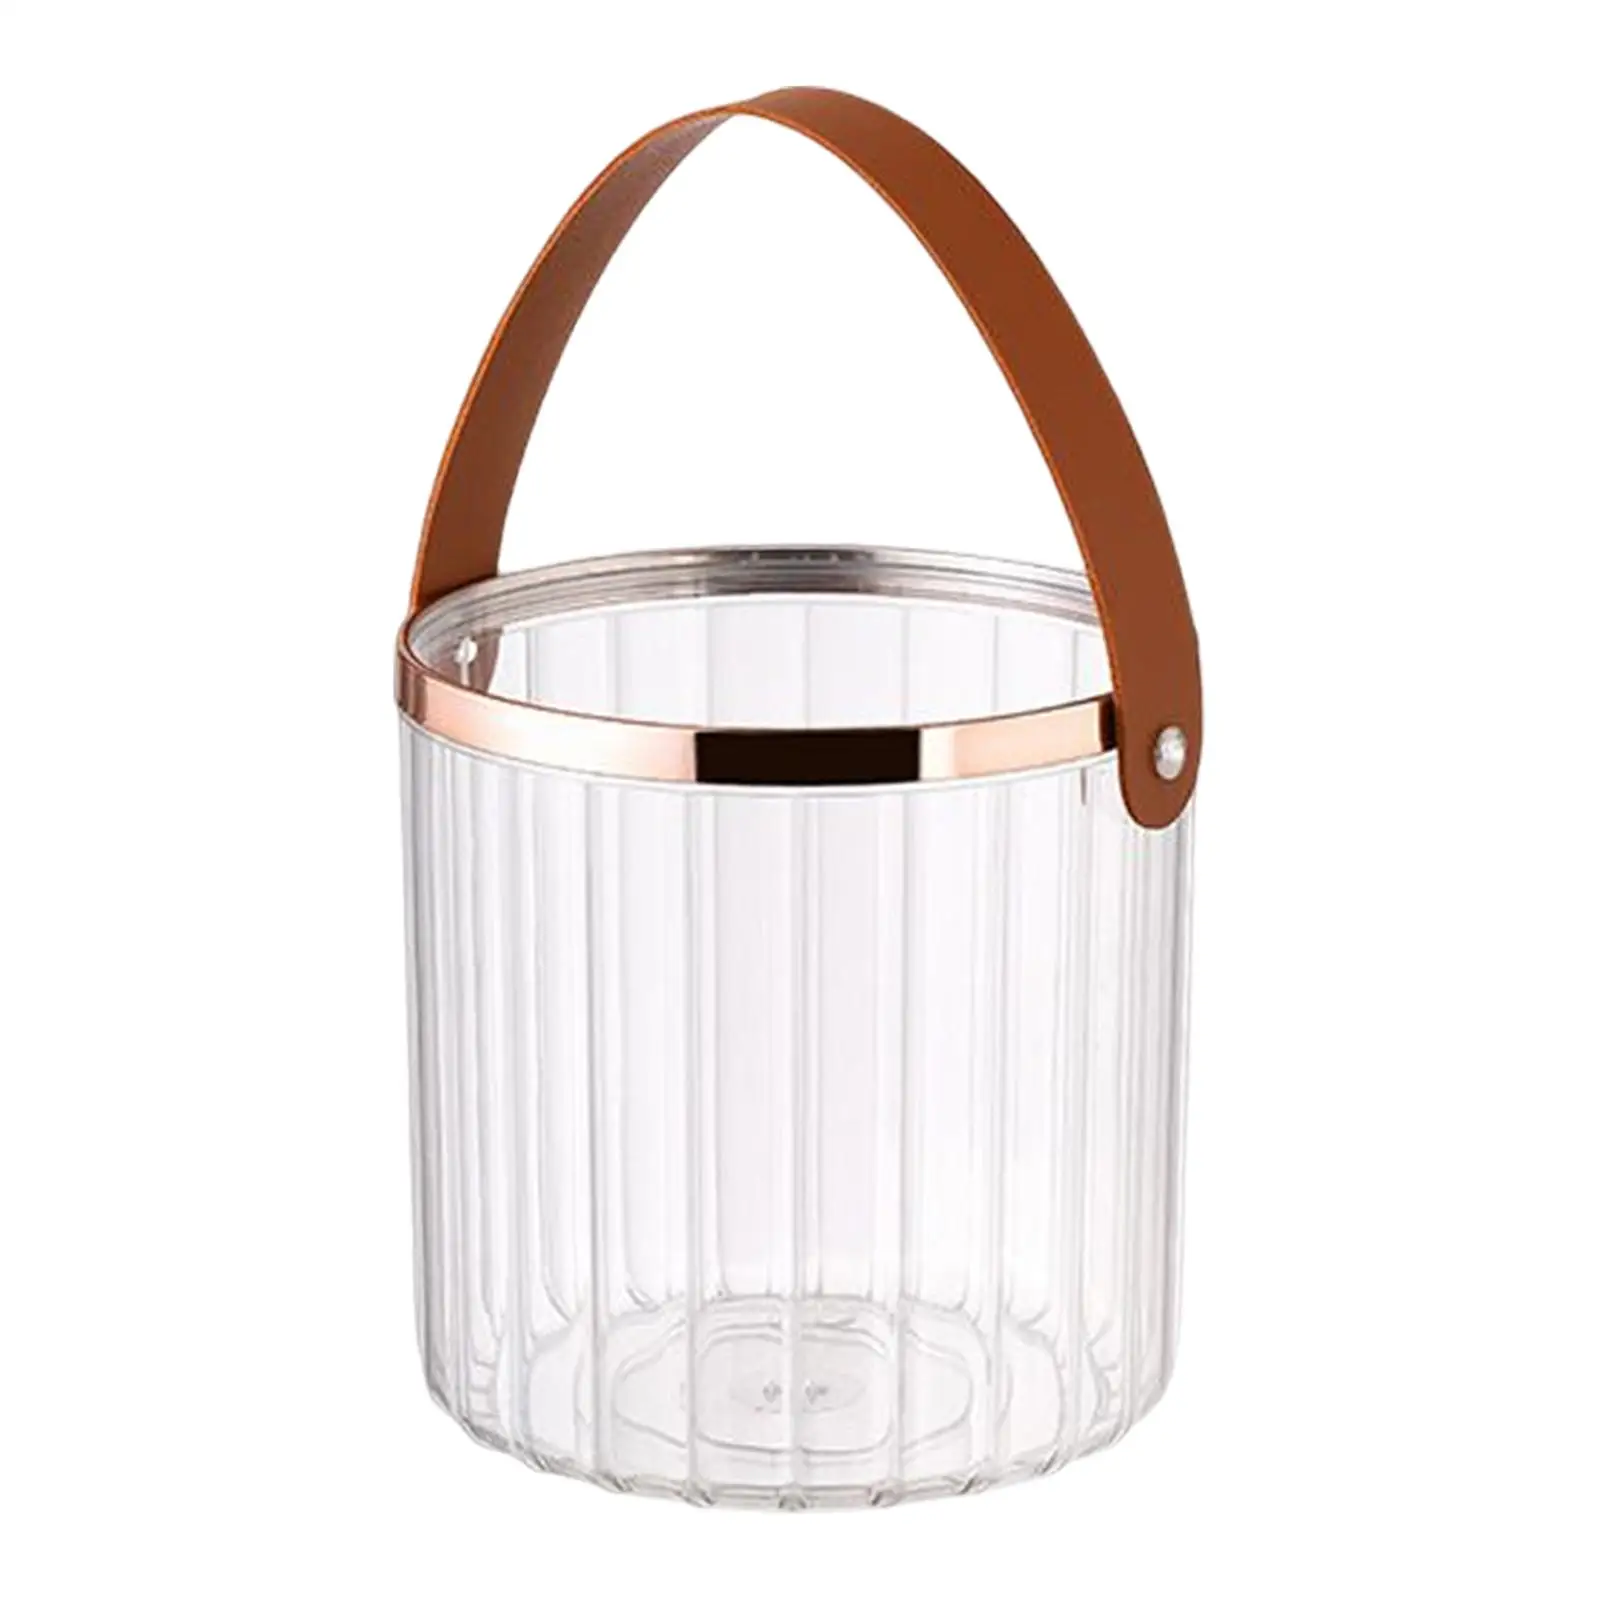 Portable Beverage Storage Bucket Fruit Storage Basket Storage Container Fruit Plate for Party Kitchen Camping Home